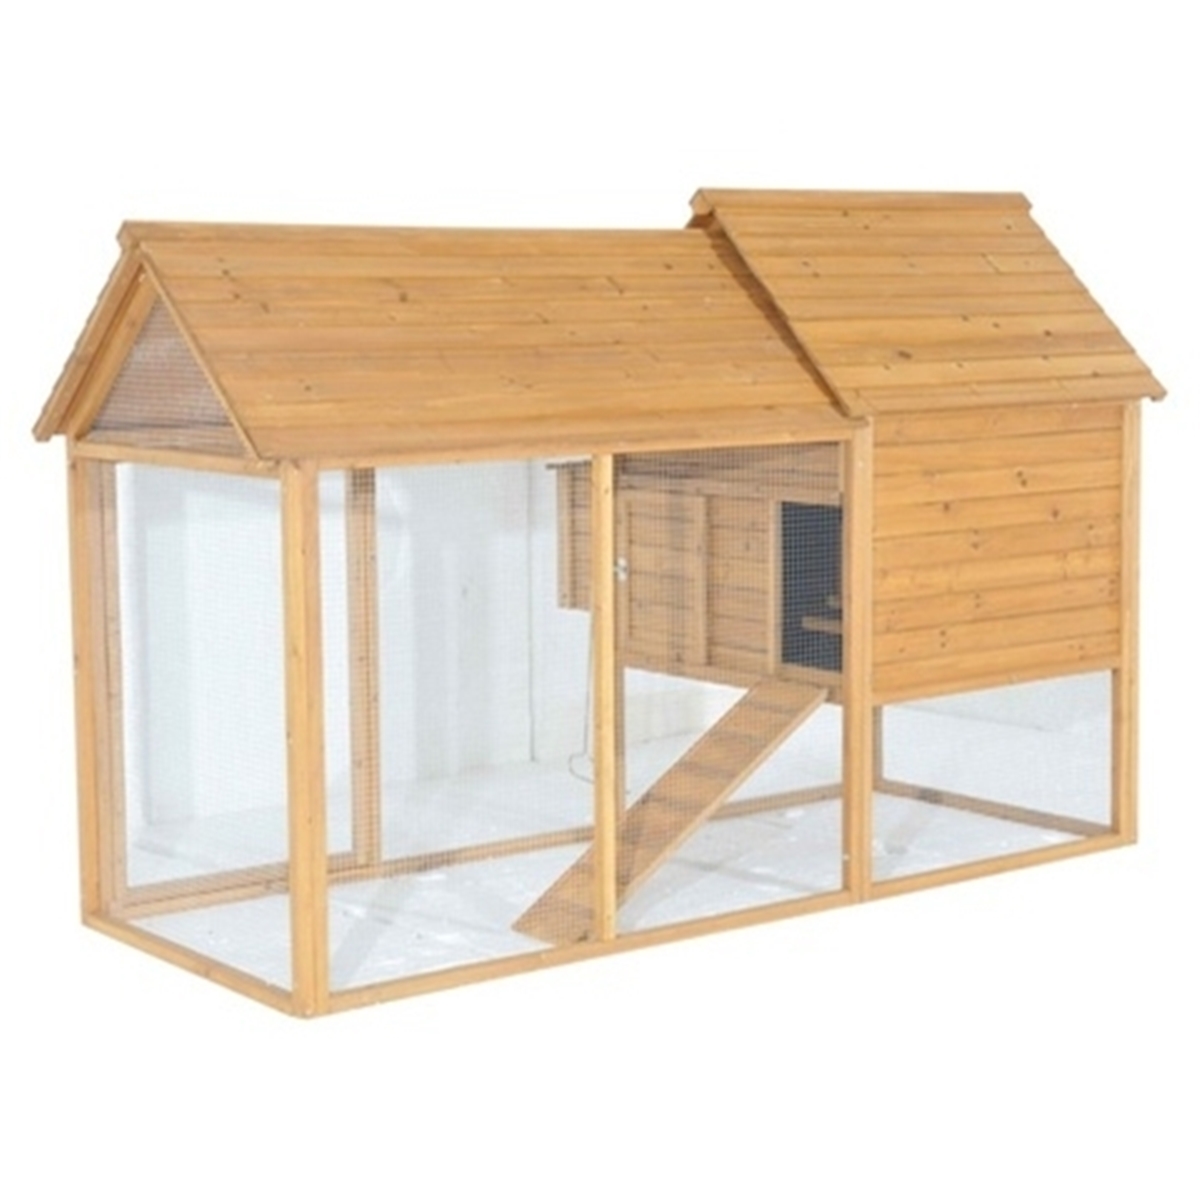 Chickens 'R' Great : WINCHESTER CHICKEN COOP + FREE RUN - HOUSES 6-8 ...